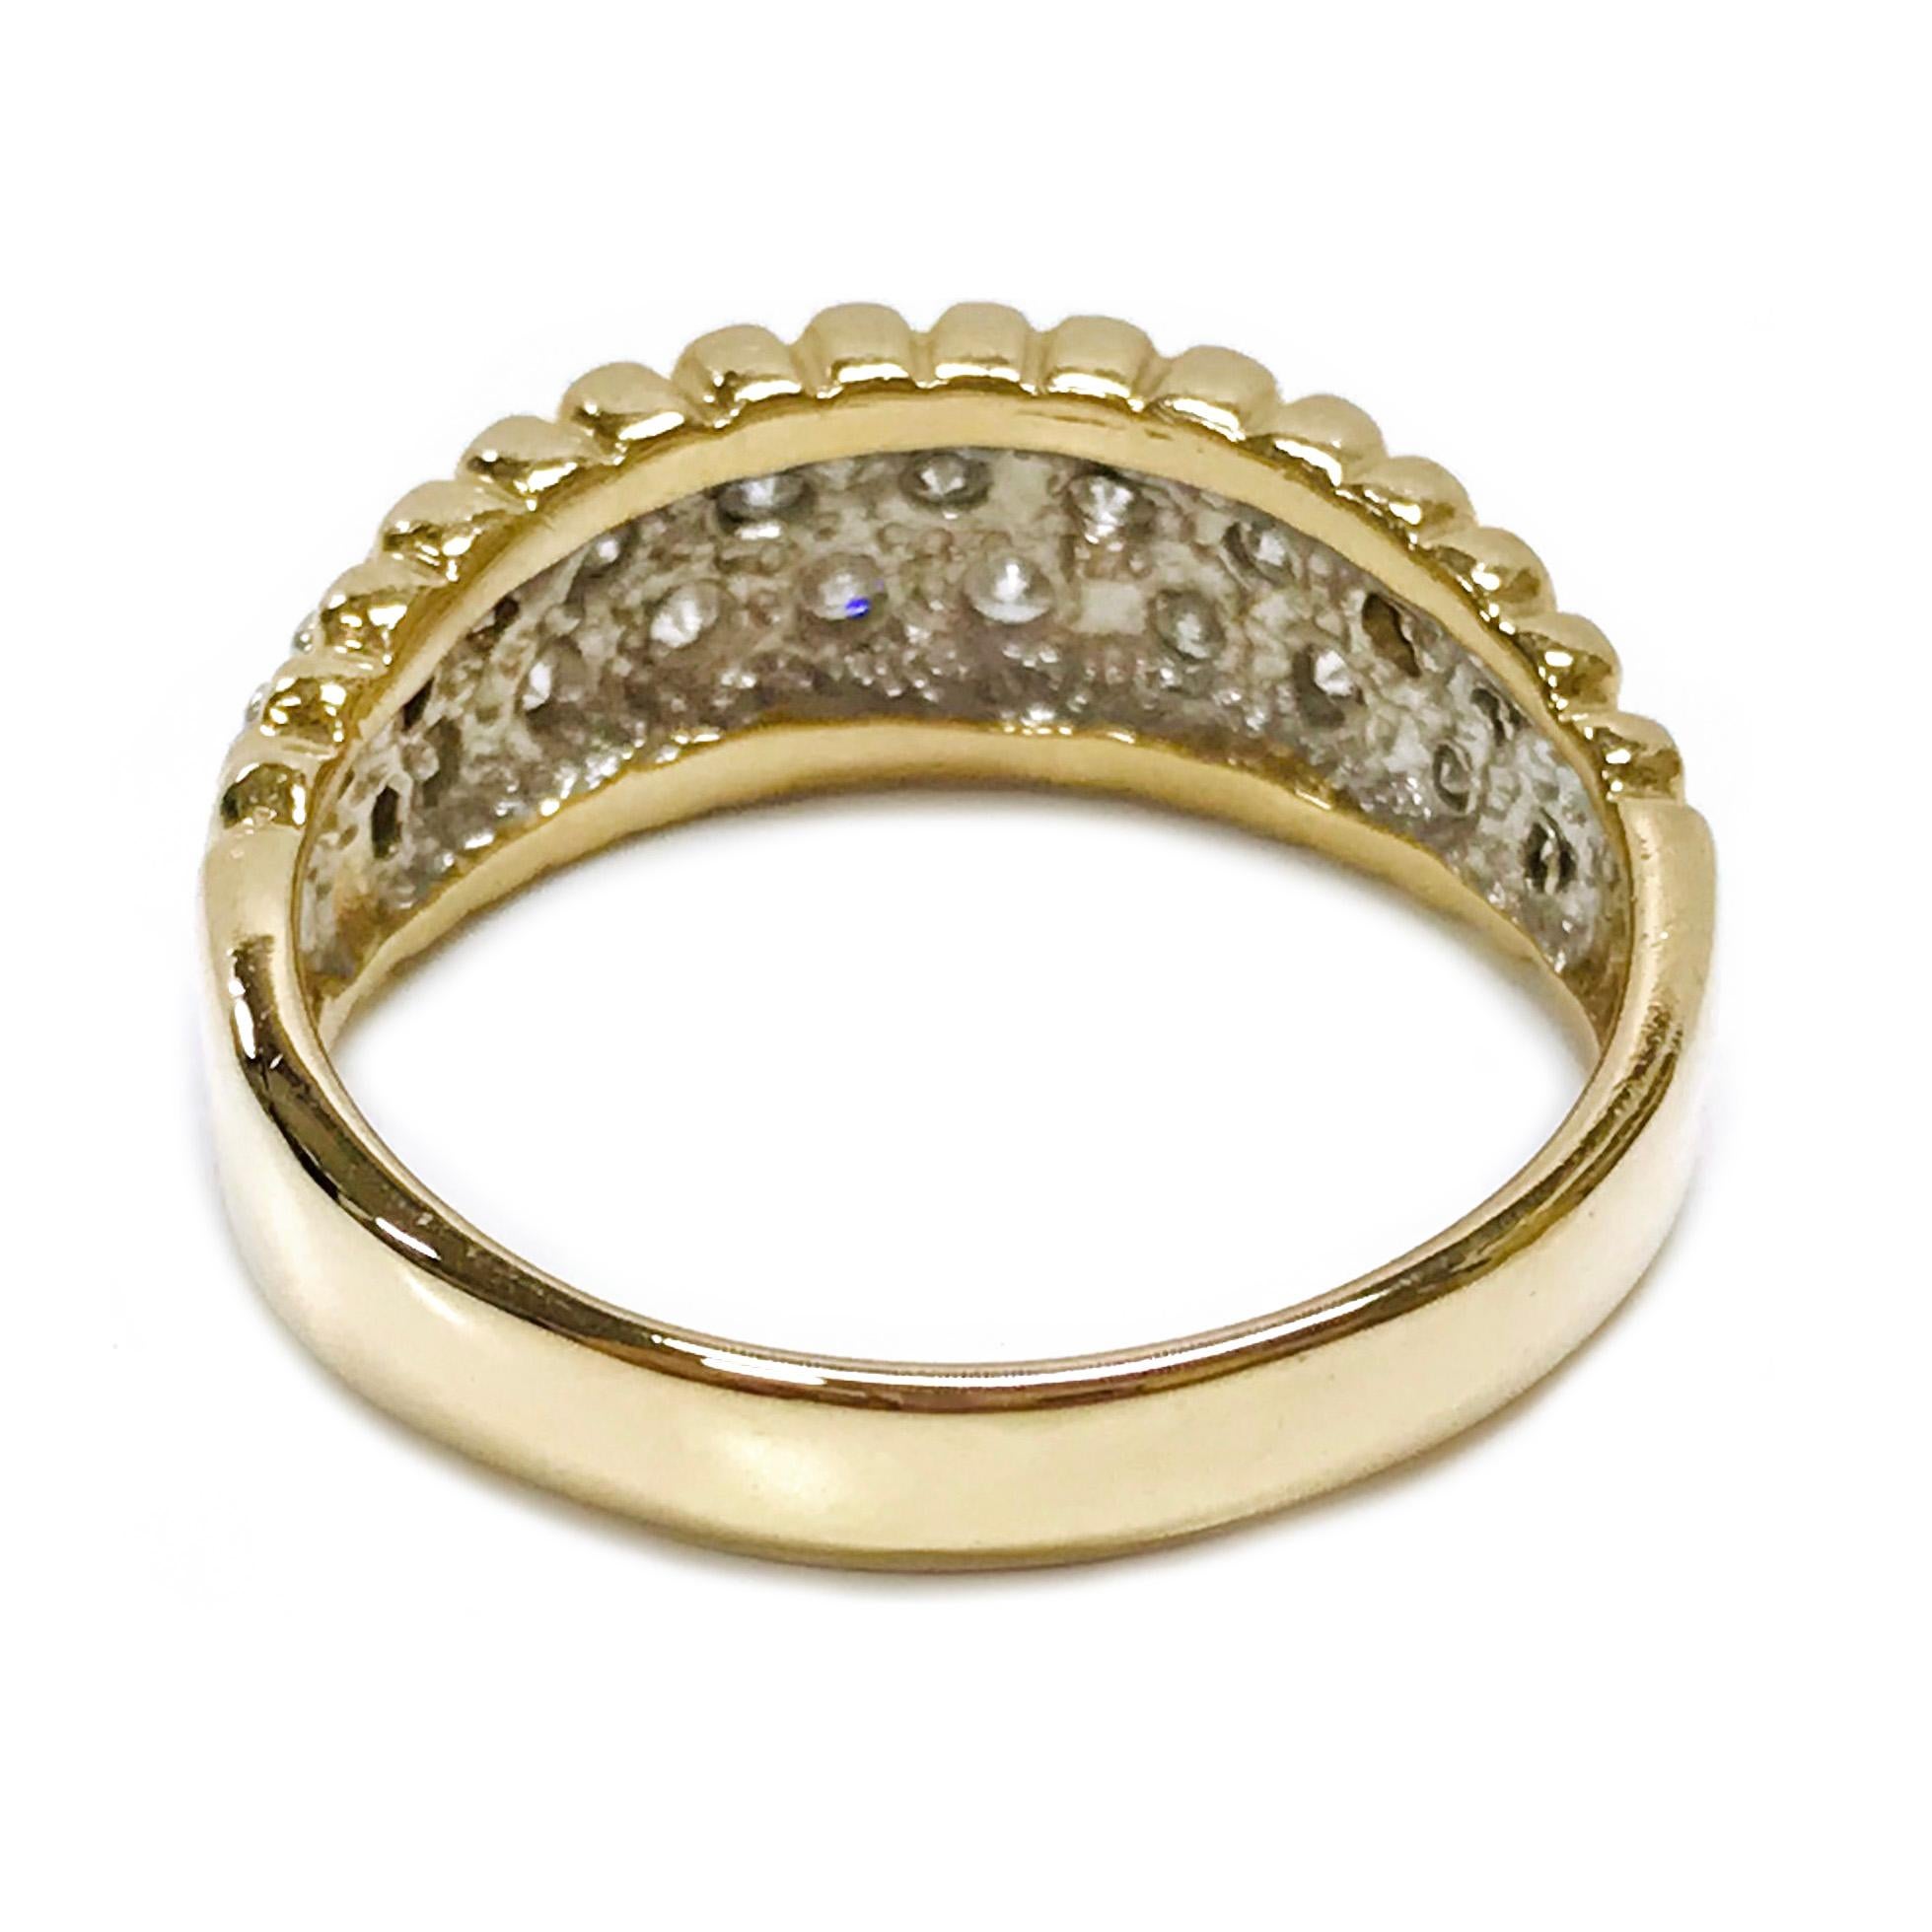 Two-Tone 14 Karat Gold Diamond Pavé Ring. The elegant ring features two rows of round graduate diamonds set in pave in white gold. The yellow gold band has scalloped edges along the top and bottom where the diamonds are set in the middle. The